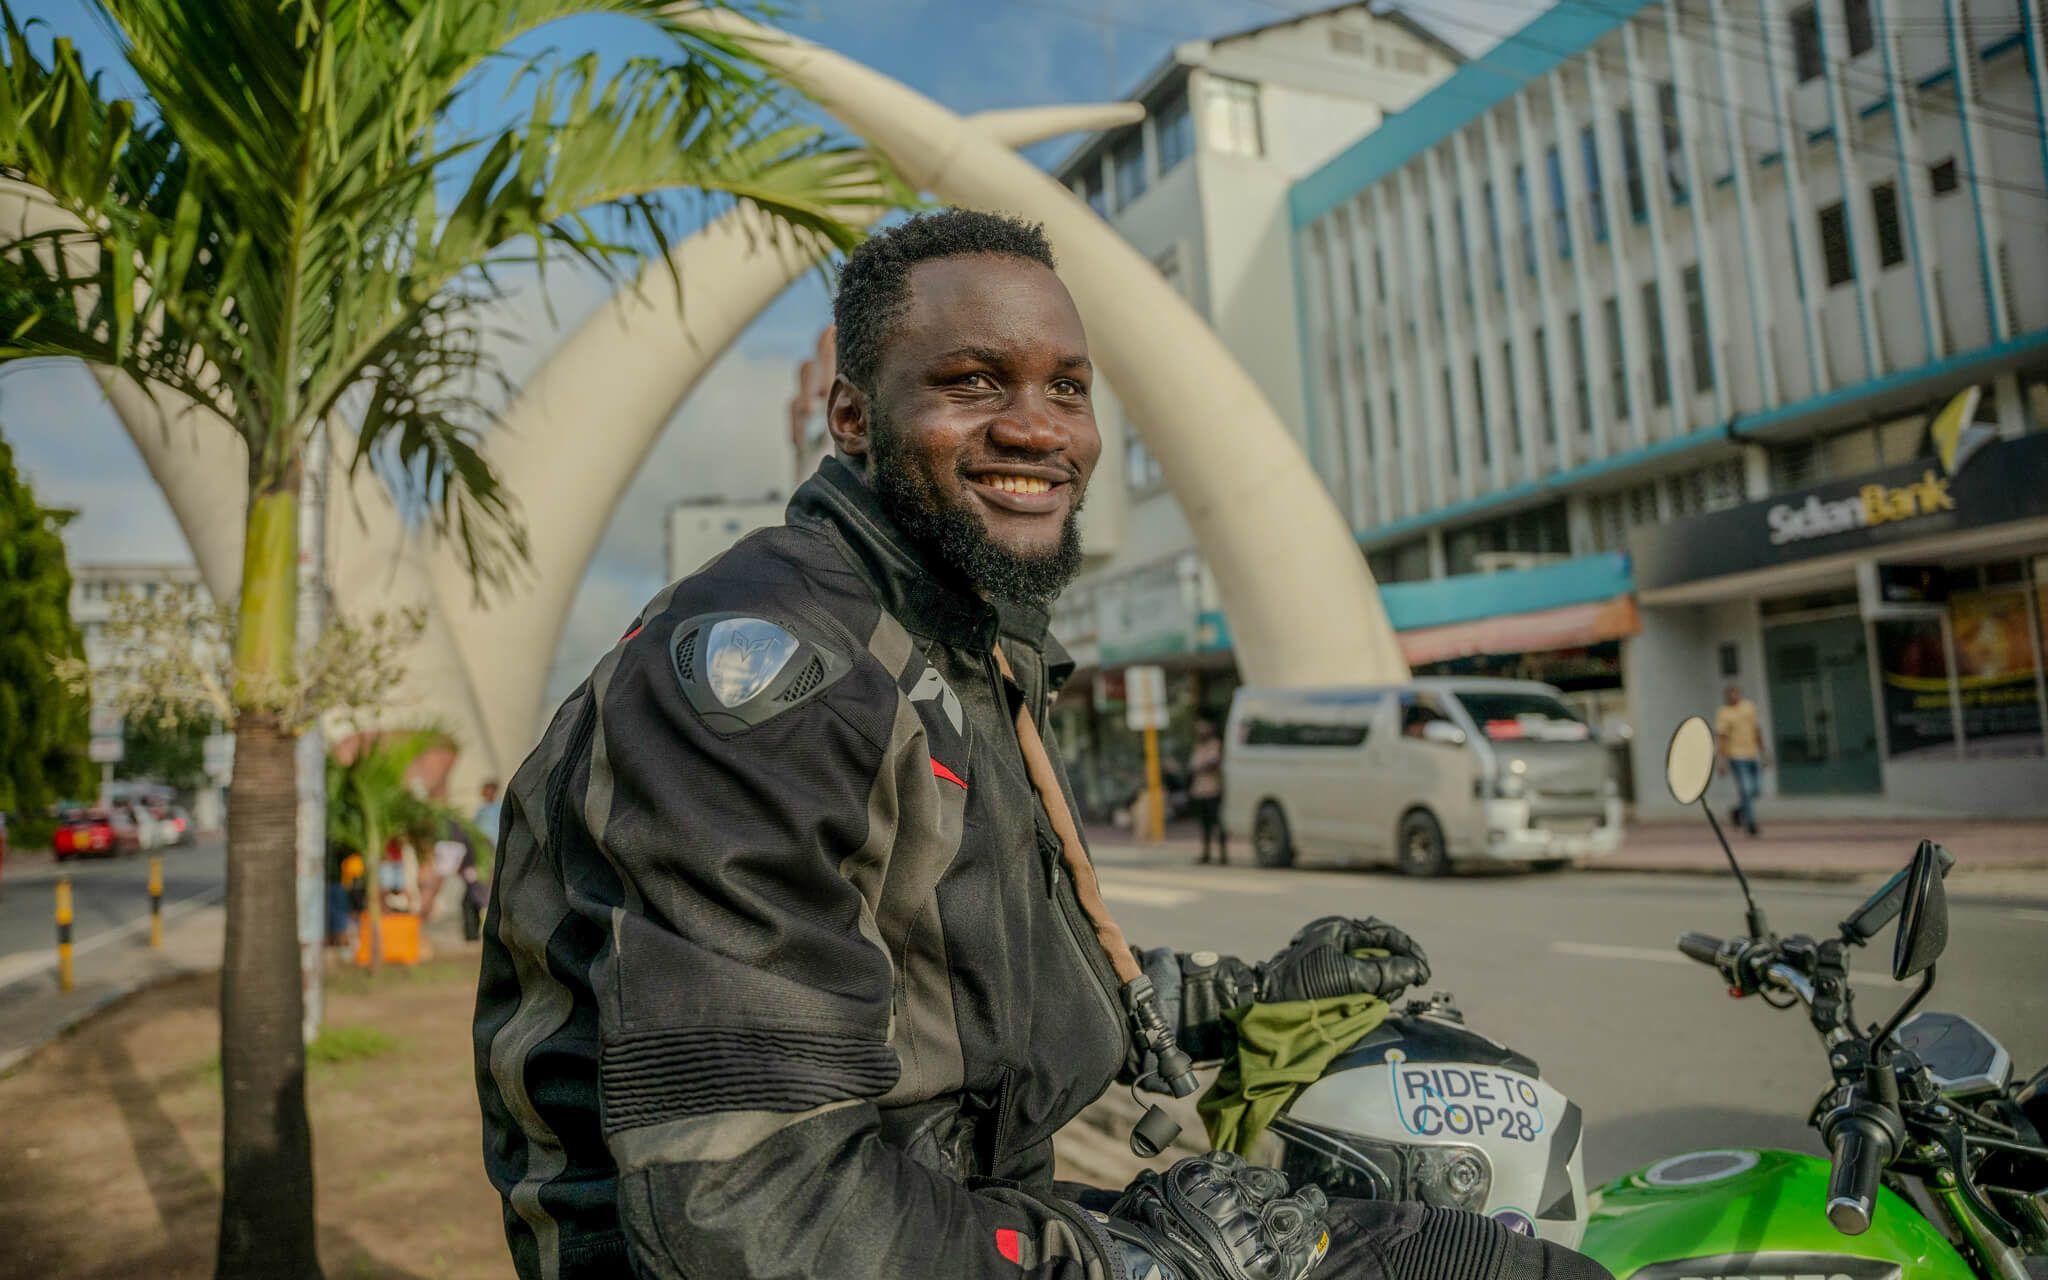 A fan of long-distance touring, motorcycle enthusiast Edwin Mariwa was happy to take on the challenge, covering nearly 7,000km in over a month.
Photo: Mazi Mobility